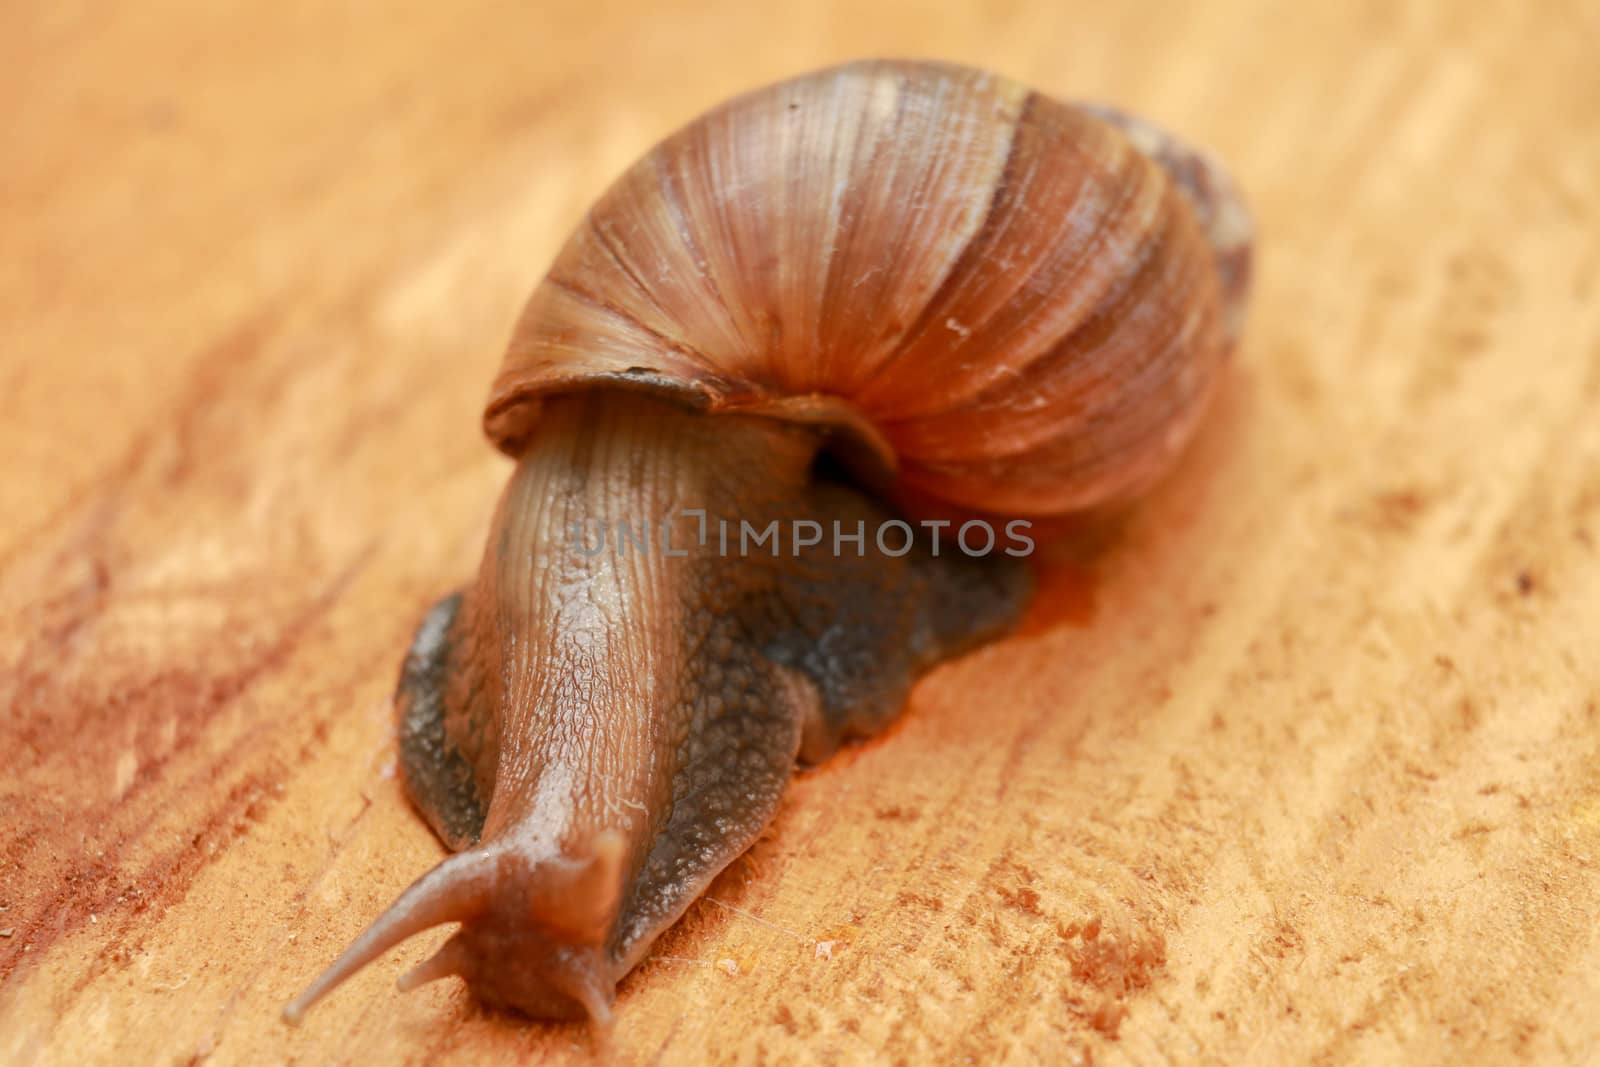 Giant snail, Scutalus, Achatina fulica. Crawling on wood in the afternoon. They have a coiled shell to protect body and Slime can made Nourishing cream. Natural animal. Slow life concept. Beautiful by Sanatana2008